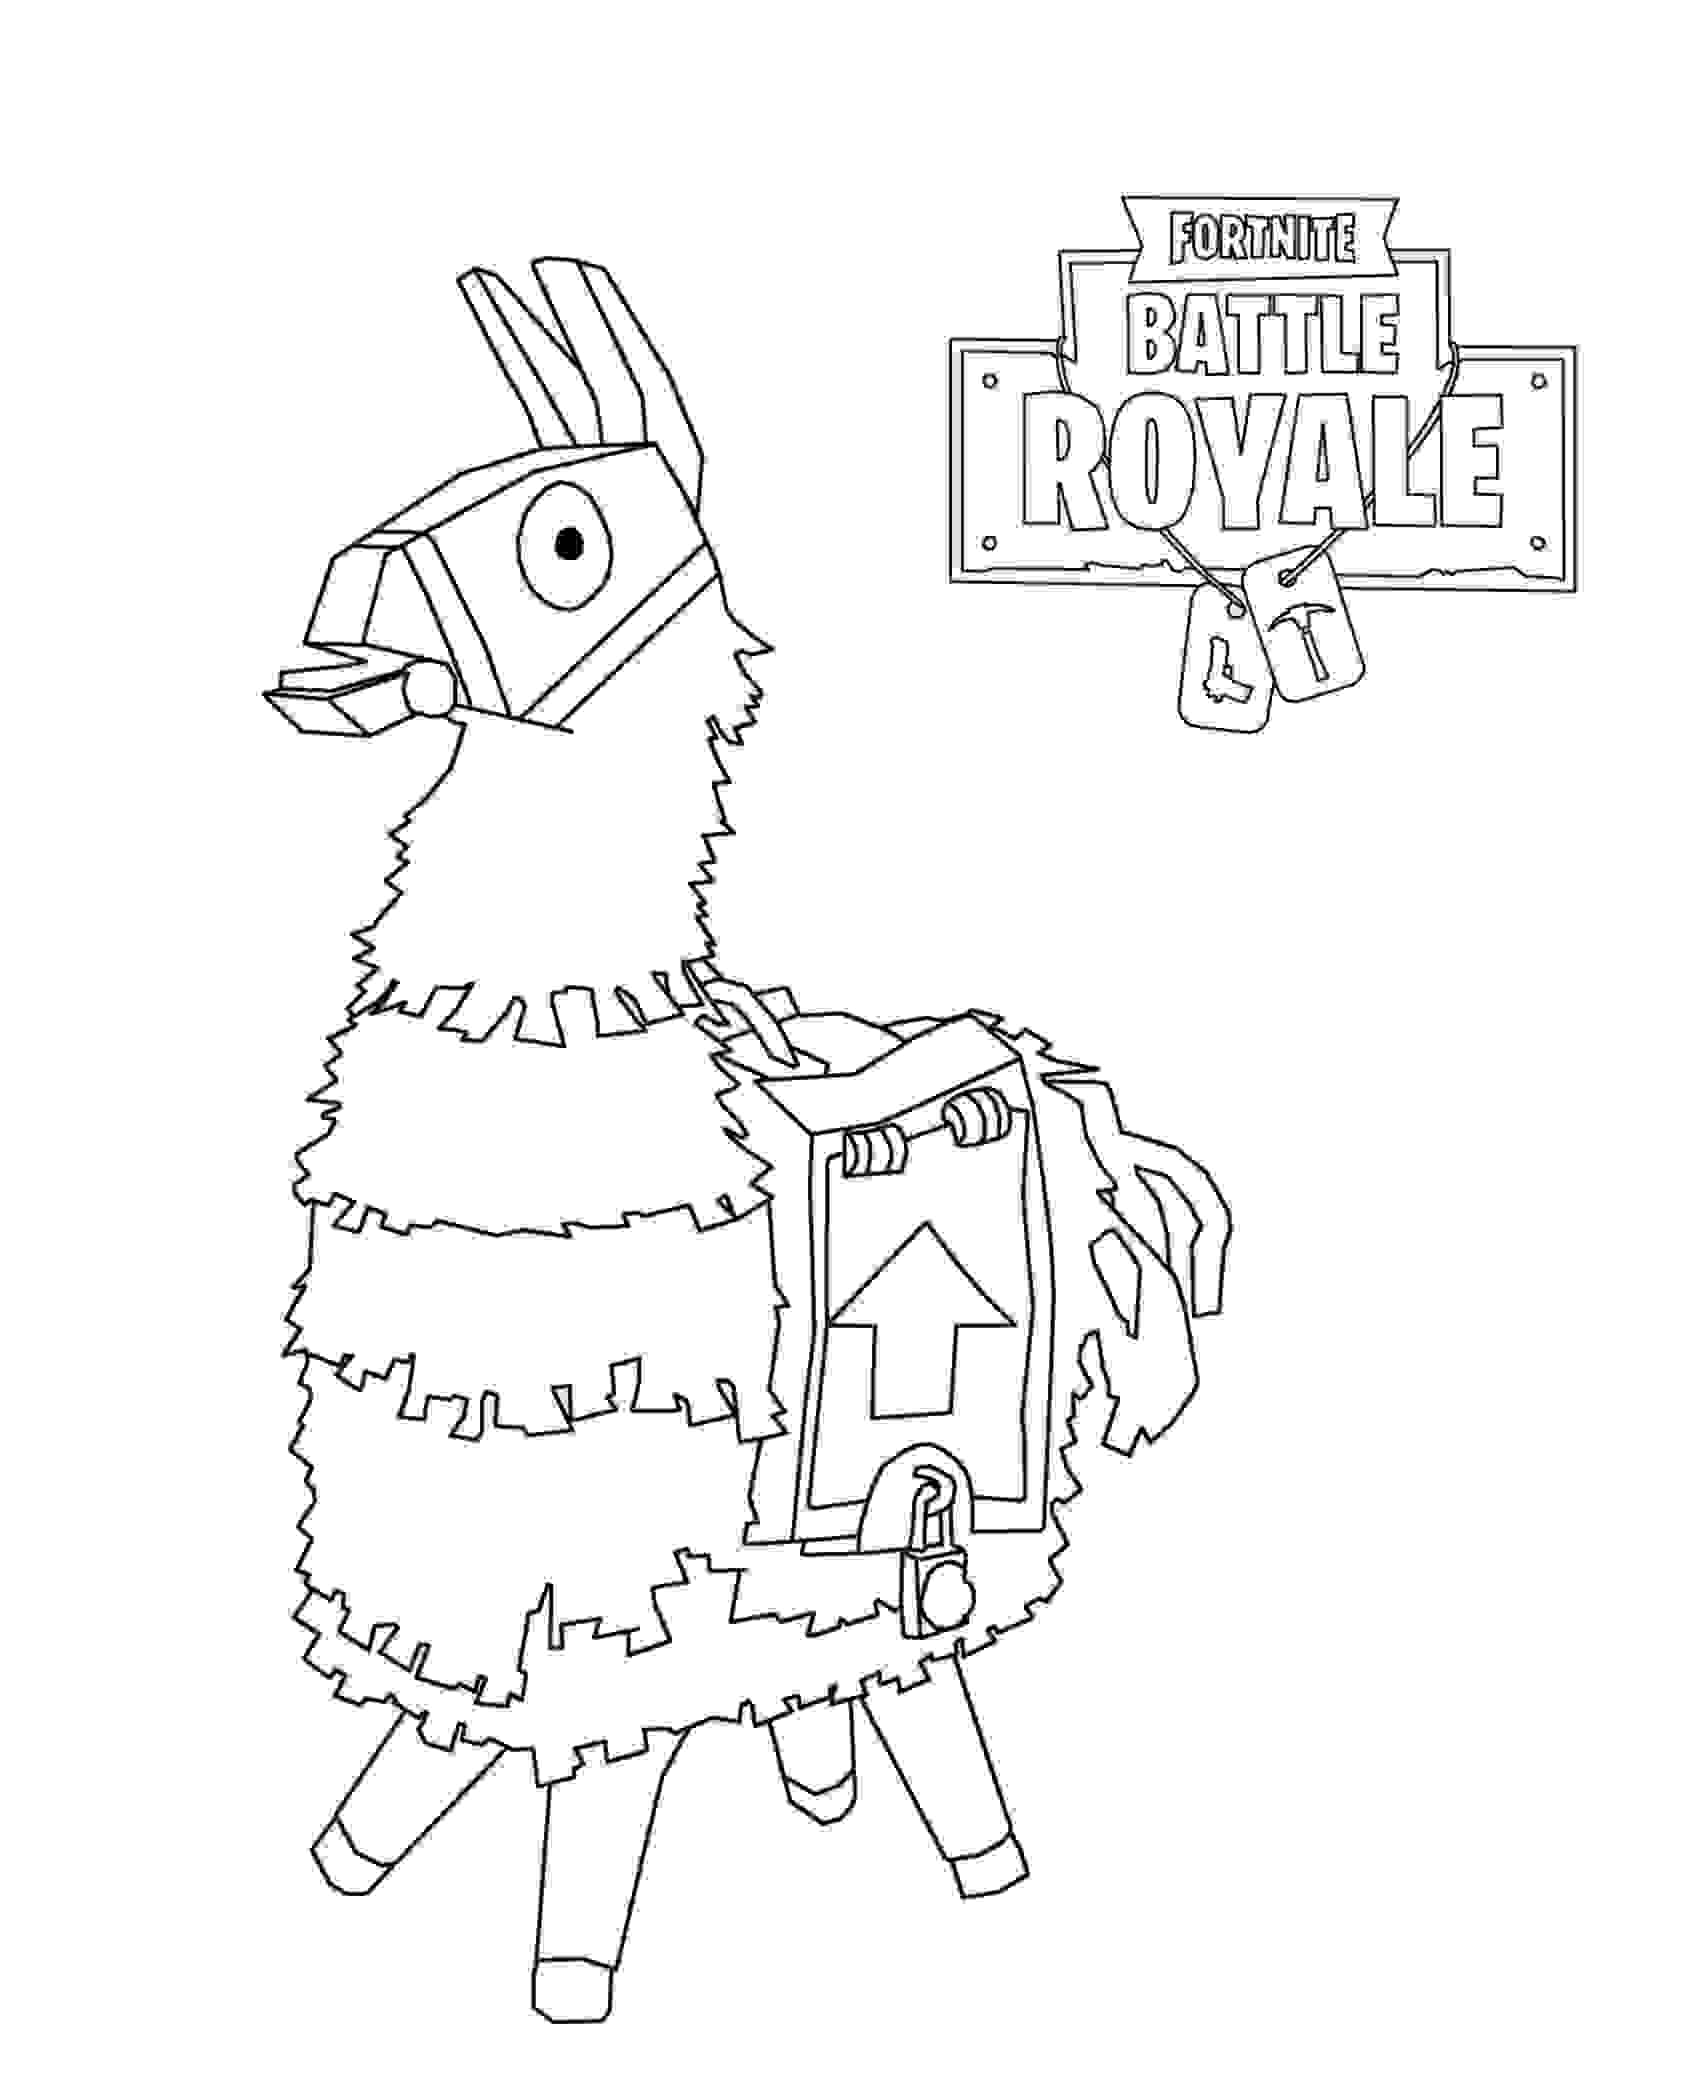 Loot Llama in Fortnite Save the World from Fortnite